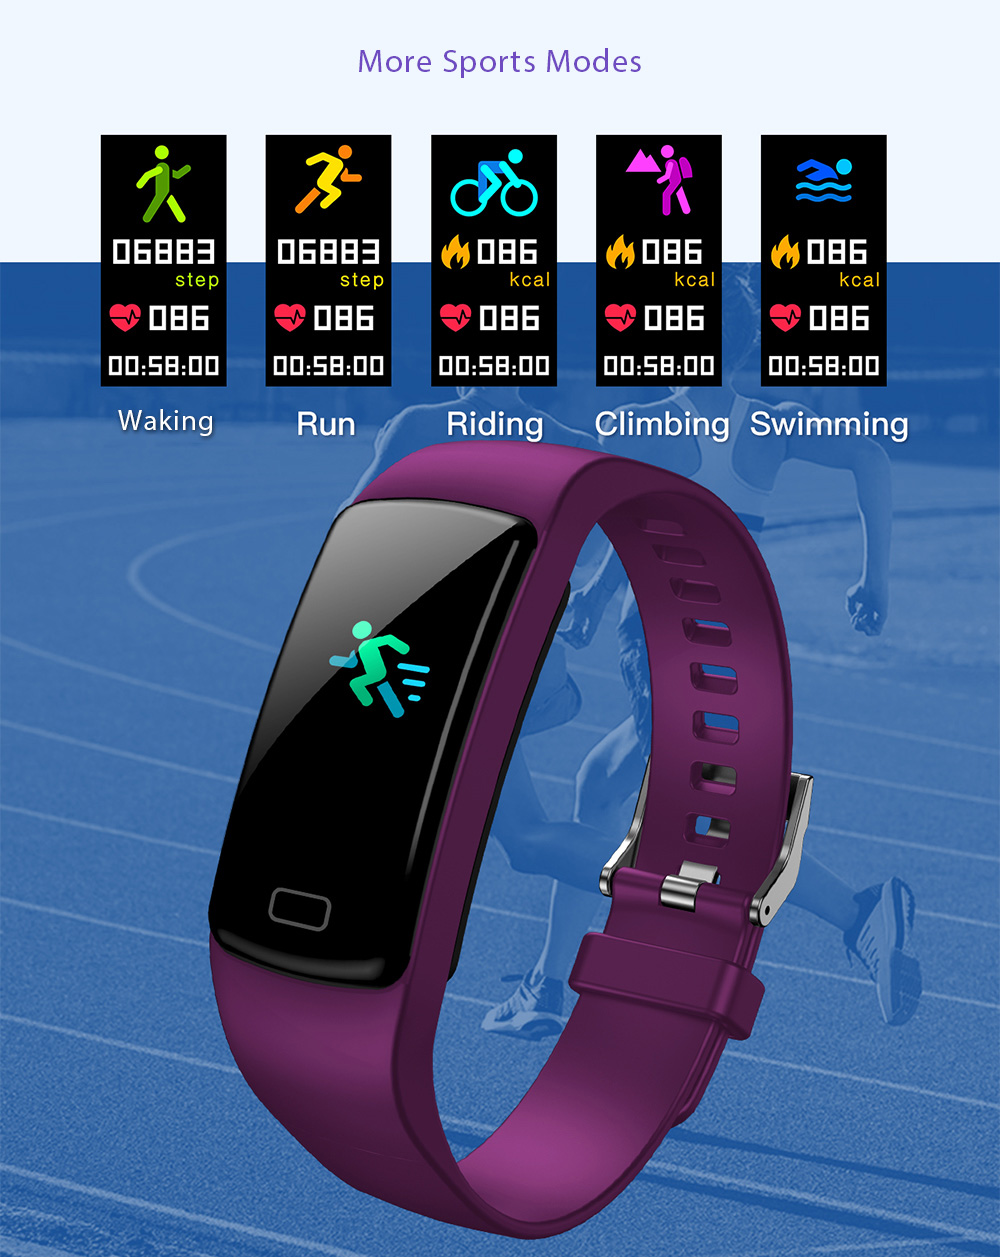 Y9 Smart Bluetooth Bracelet Color Screen Heart Rate Blood Pressure Monitoring Sports Smartwatch